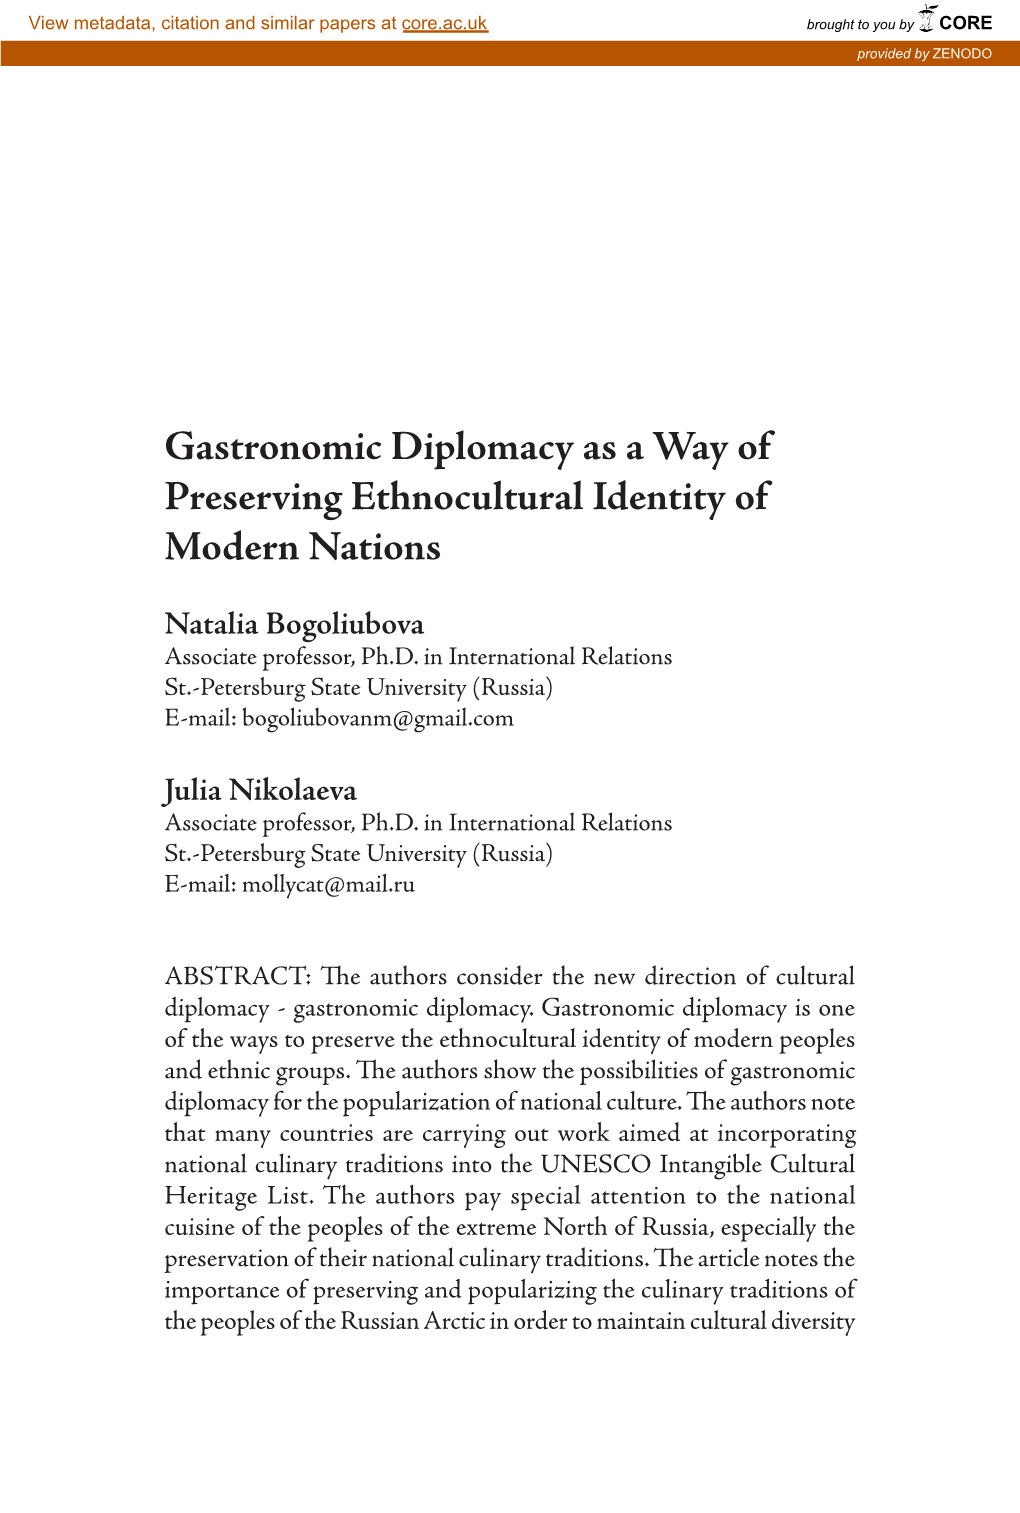 Gastronomic Diplomacy As a Way of Preserving Ethnocultural Identity of Modern Nations